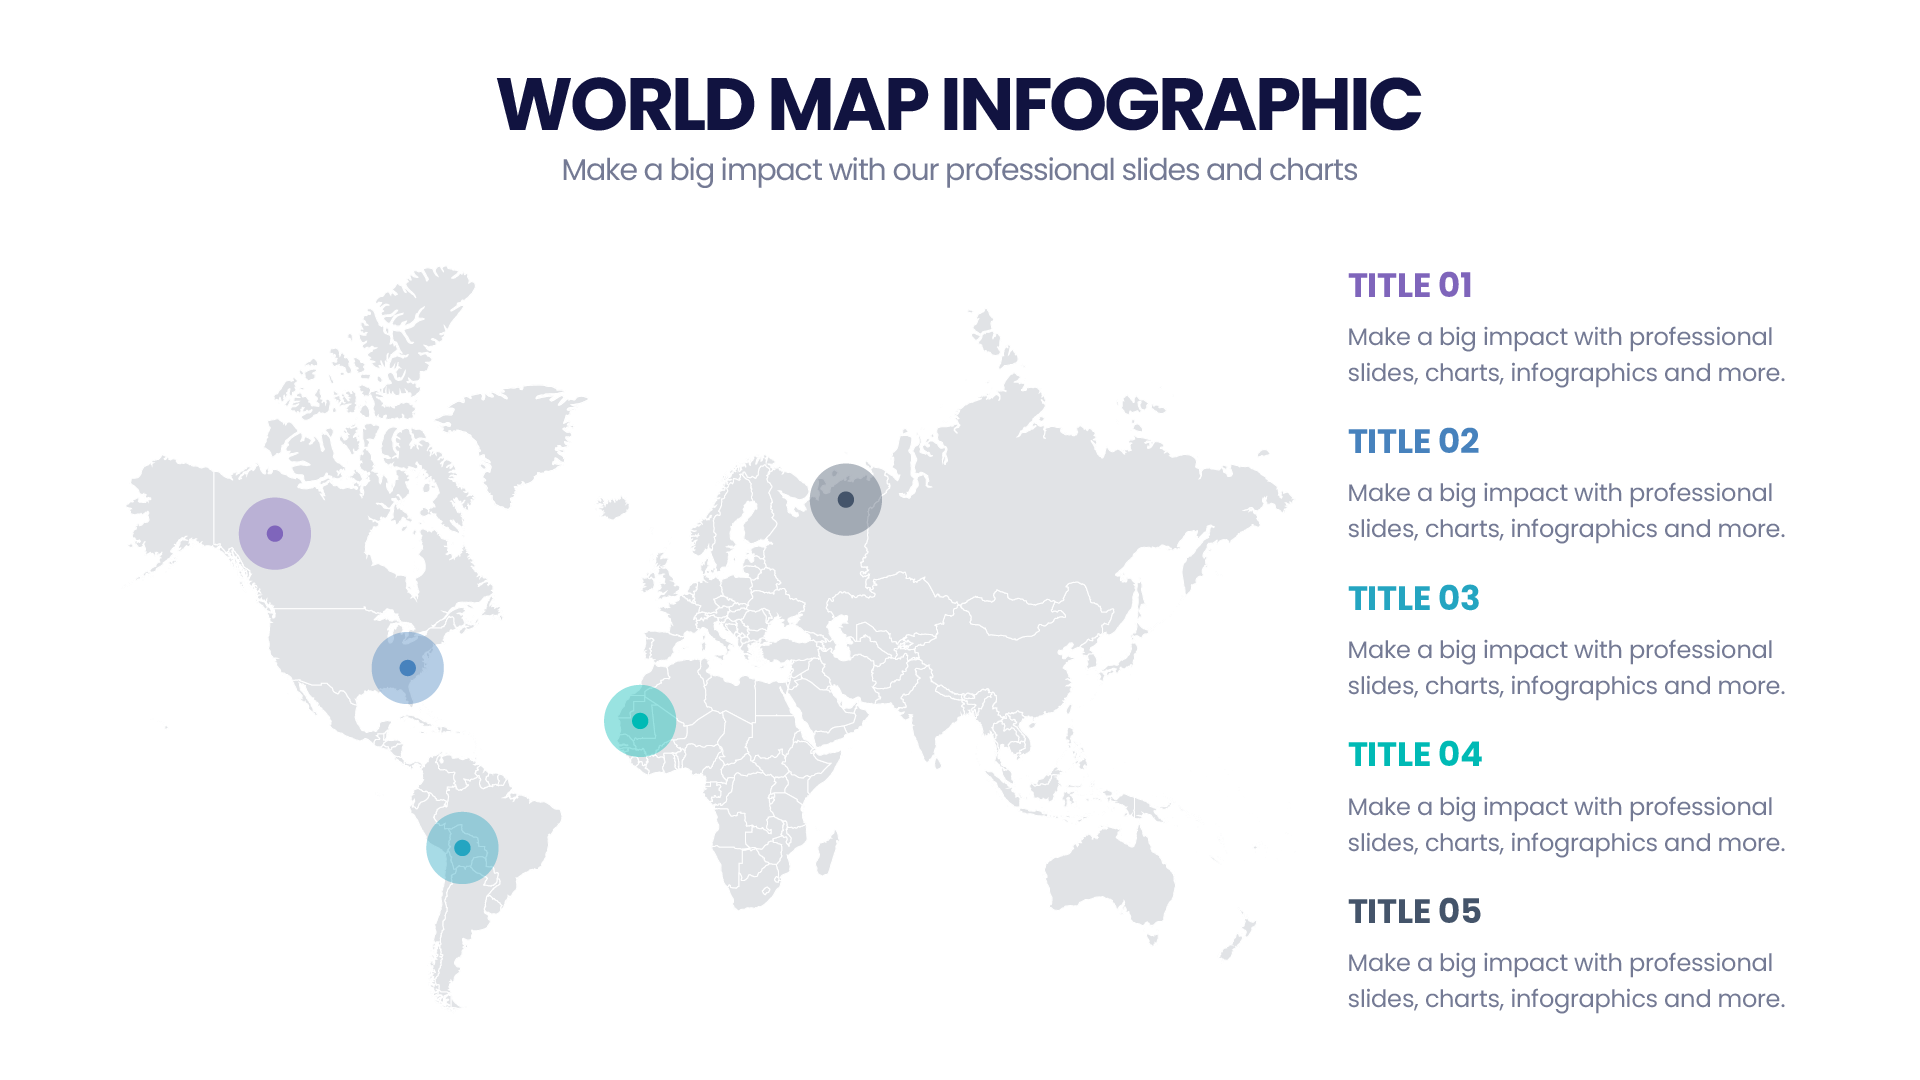 World Map Infographic templates